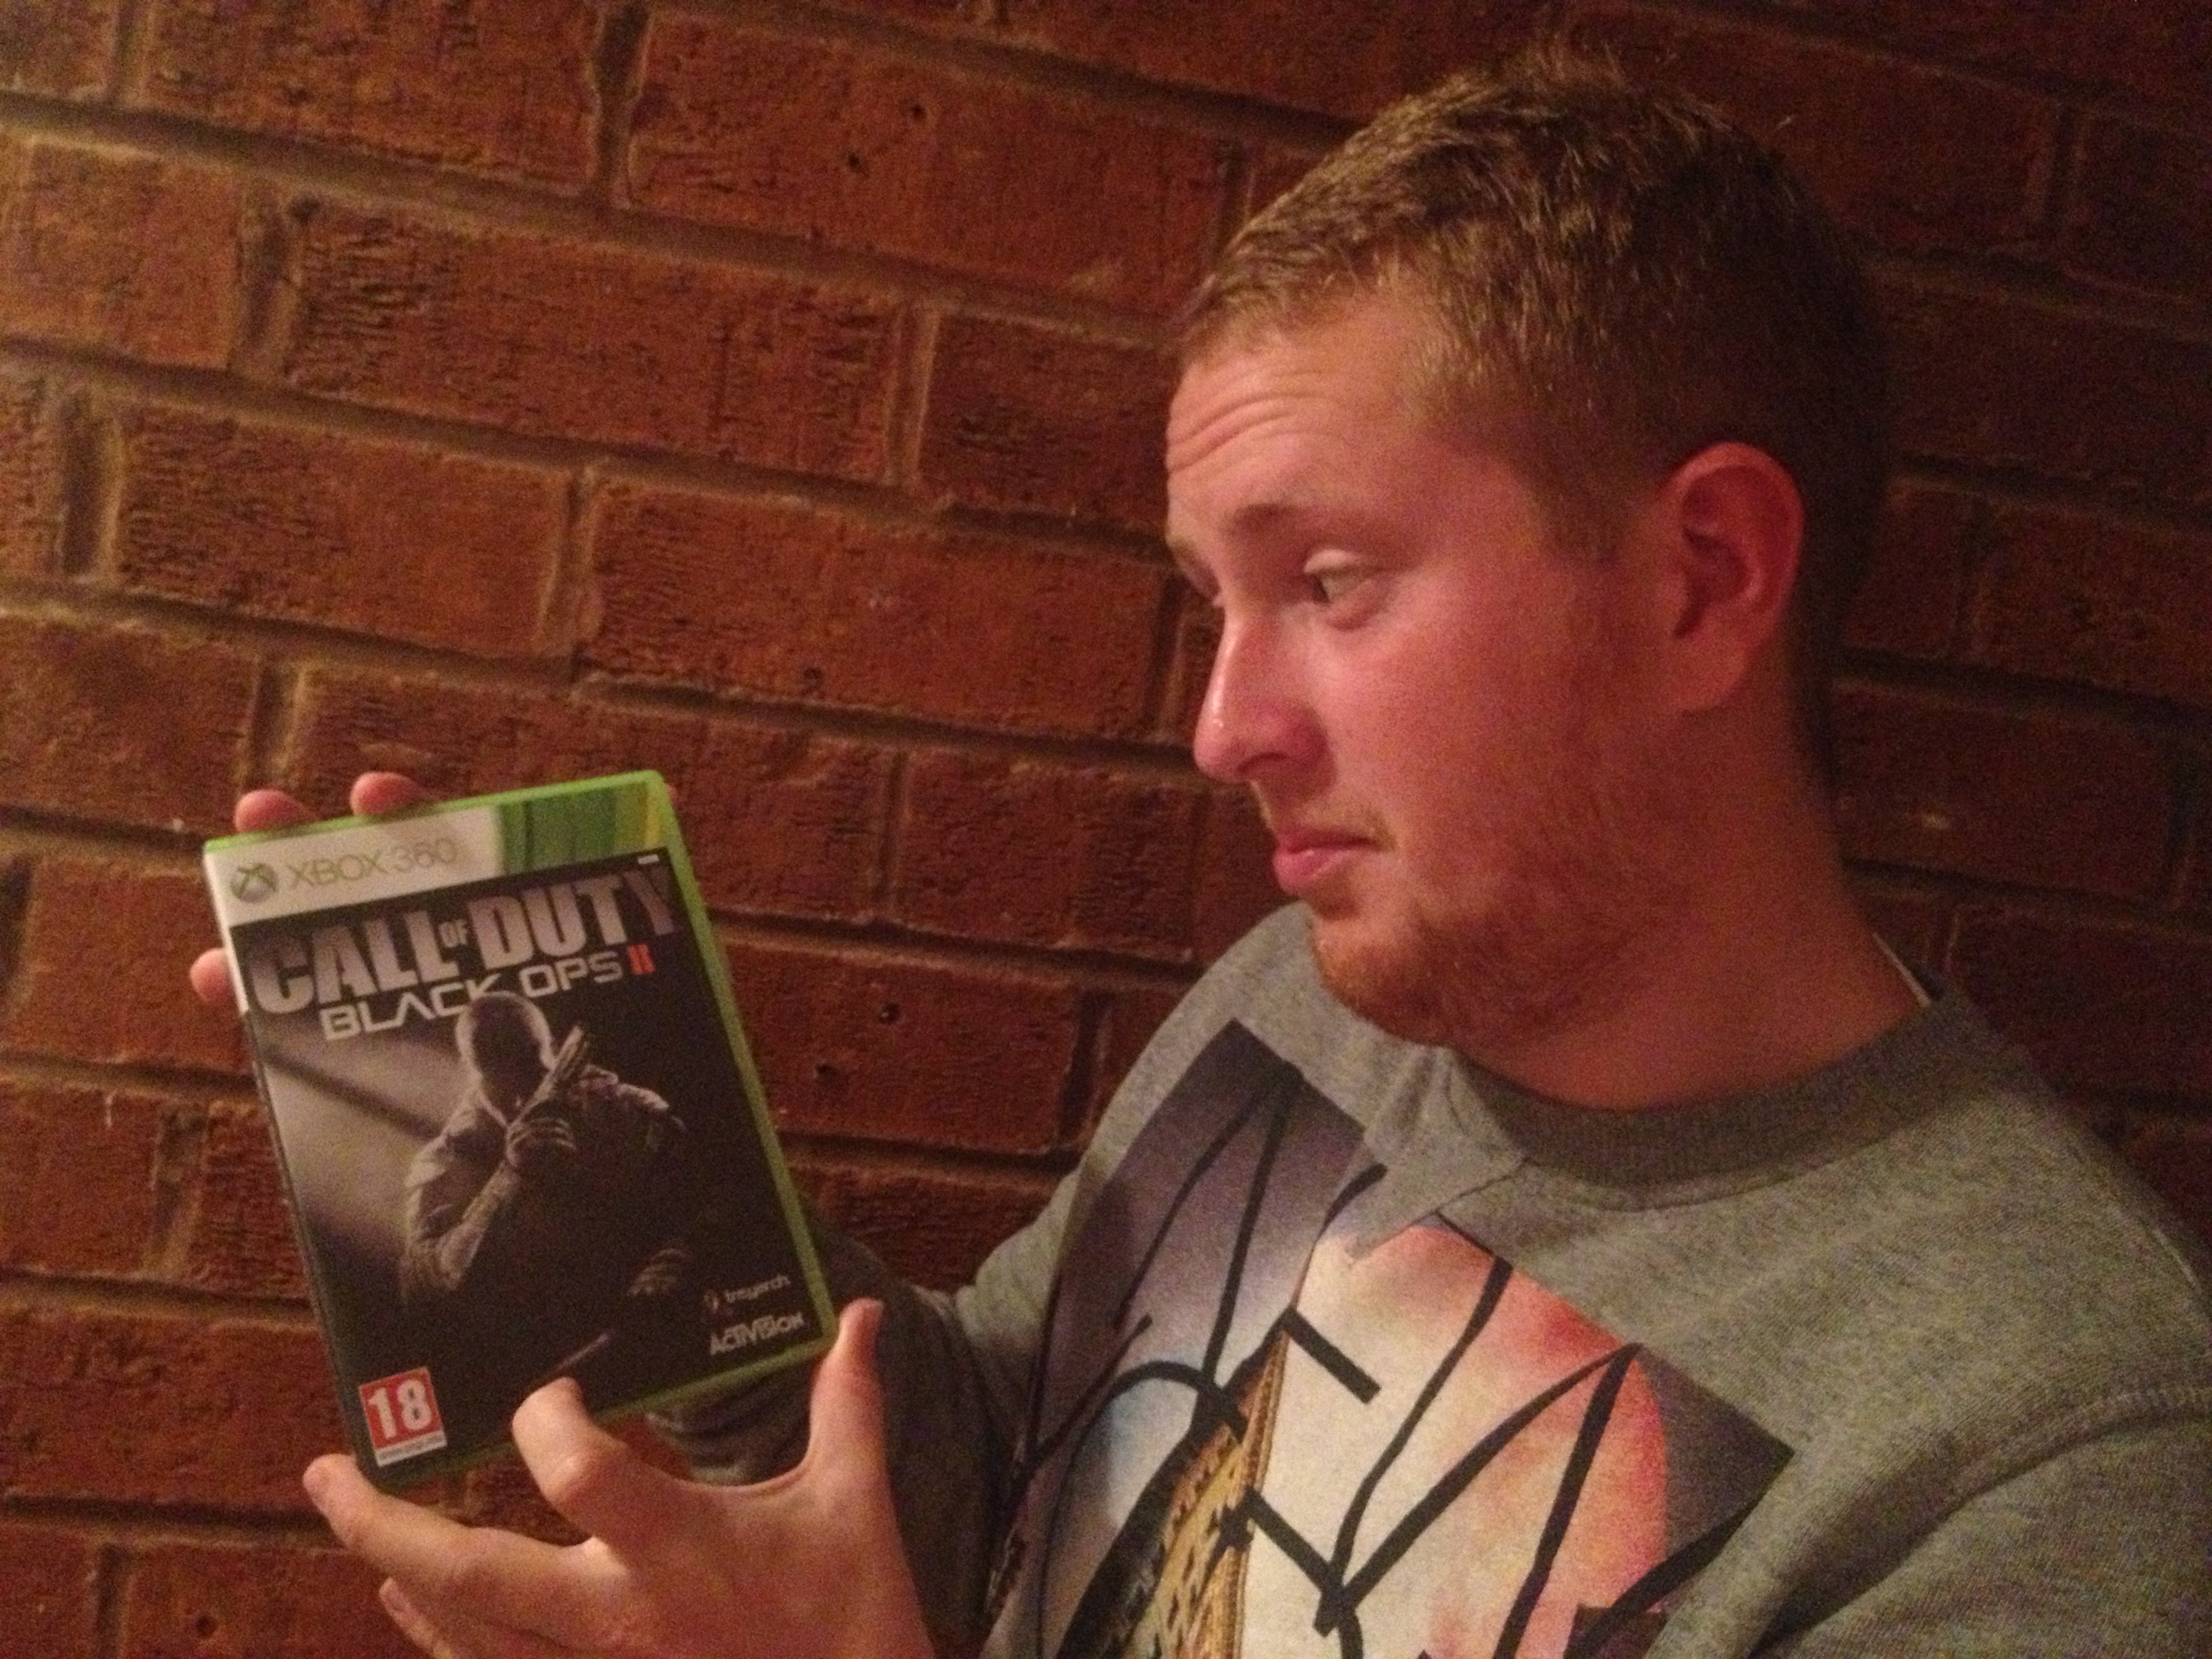 Gaming fan Keiran Loveder, from Sutton Coldfield, with his copy of Call of Duty: Black Ops II